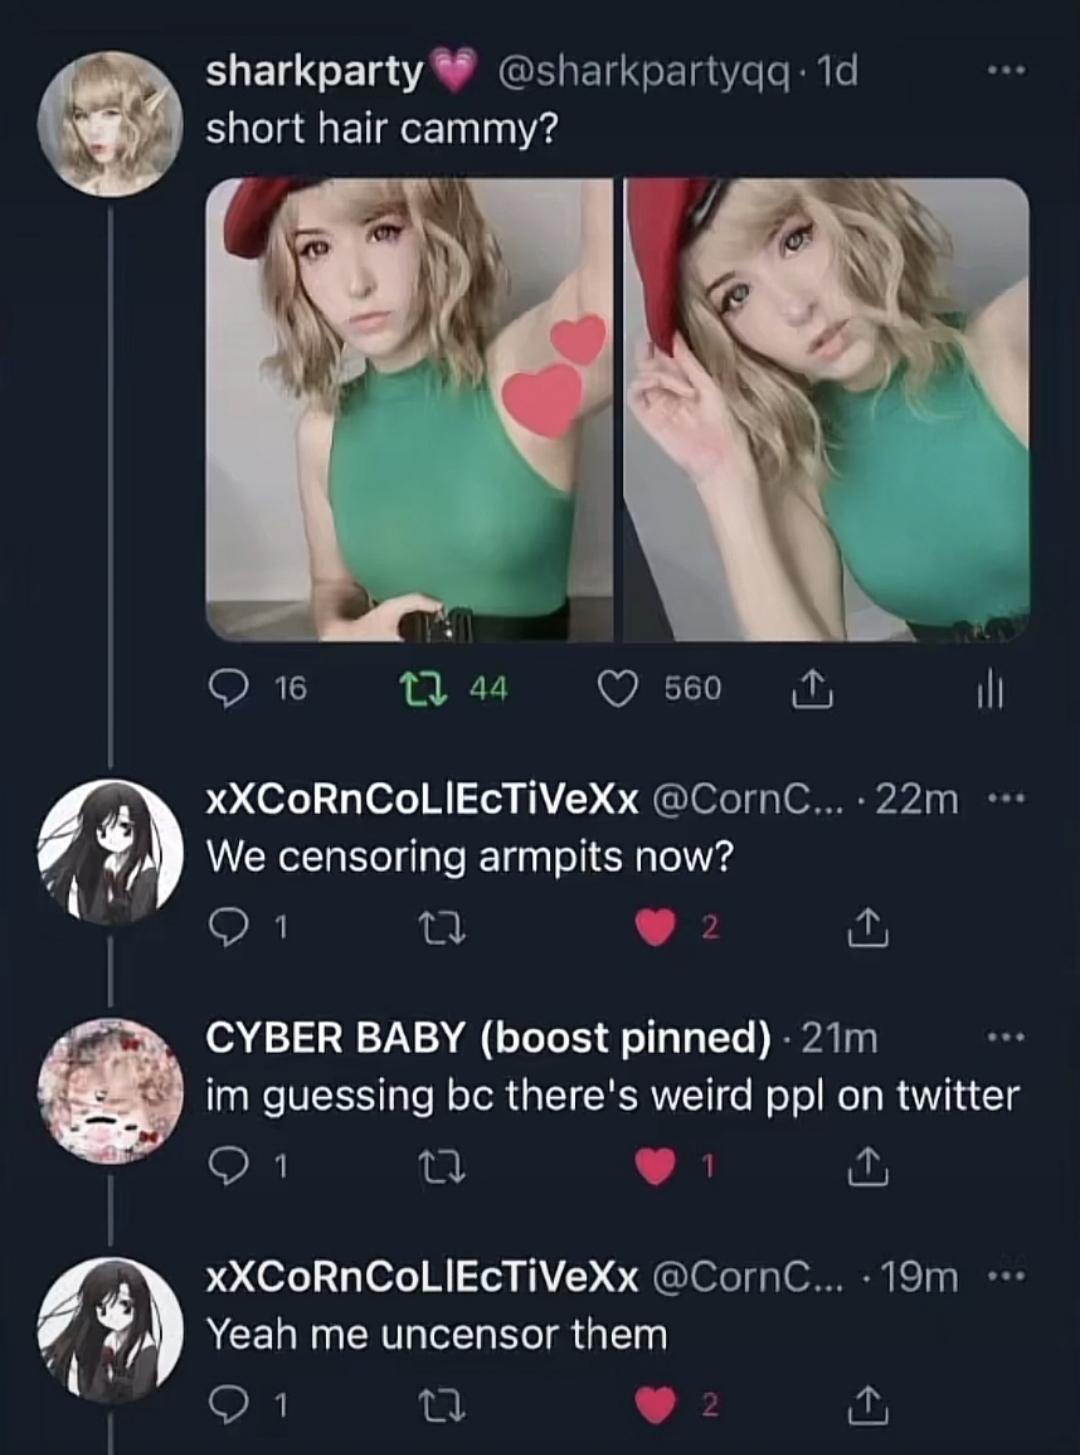 censored armpit meme - sharkparty . 1d short hair cammy? 16 22 44 560 XXCORNCOLIEcTiVeXx ... 22m We censoring armpits now? 1 27 2 Cyber Baby boost pinned 21m im guessing bc there's weird ppl on twitter 1 22 1 1 XXCORCOLIEcTiVeXx ... 19m ... Yeah me uncens